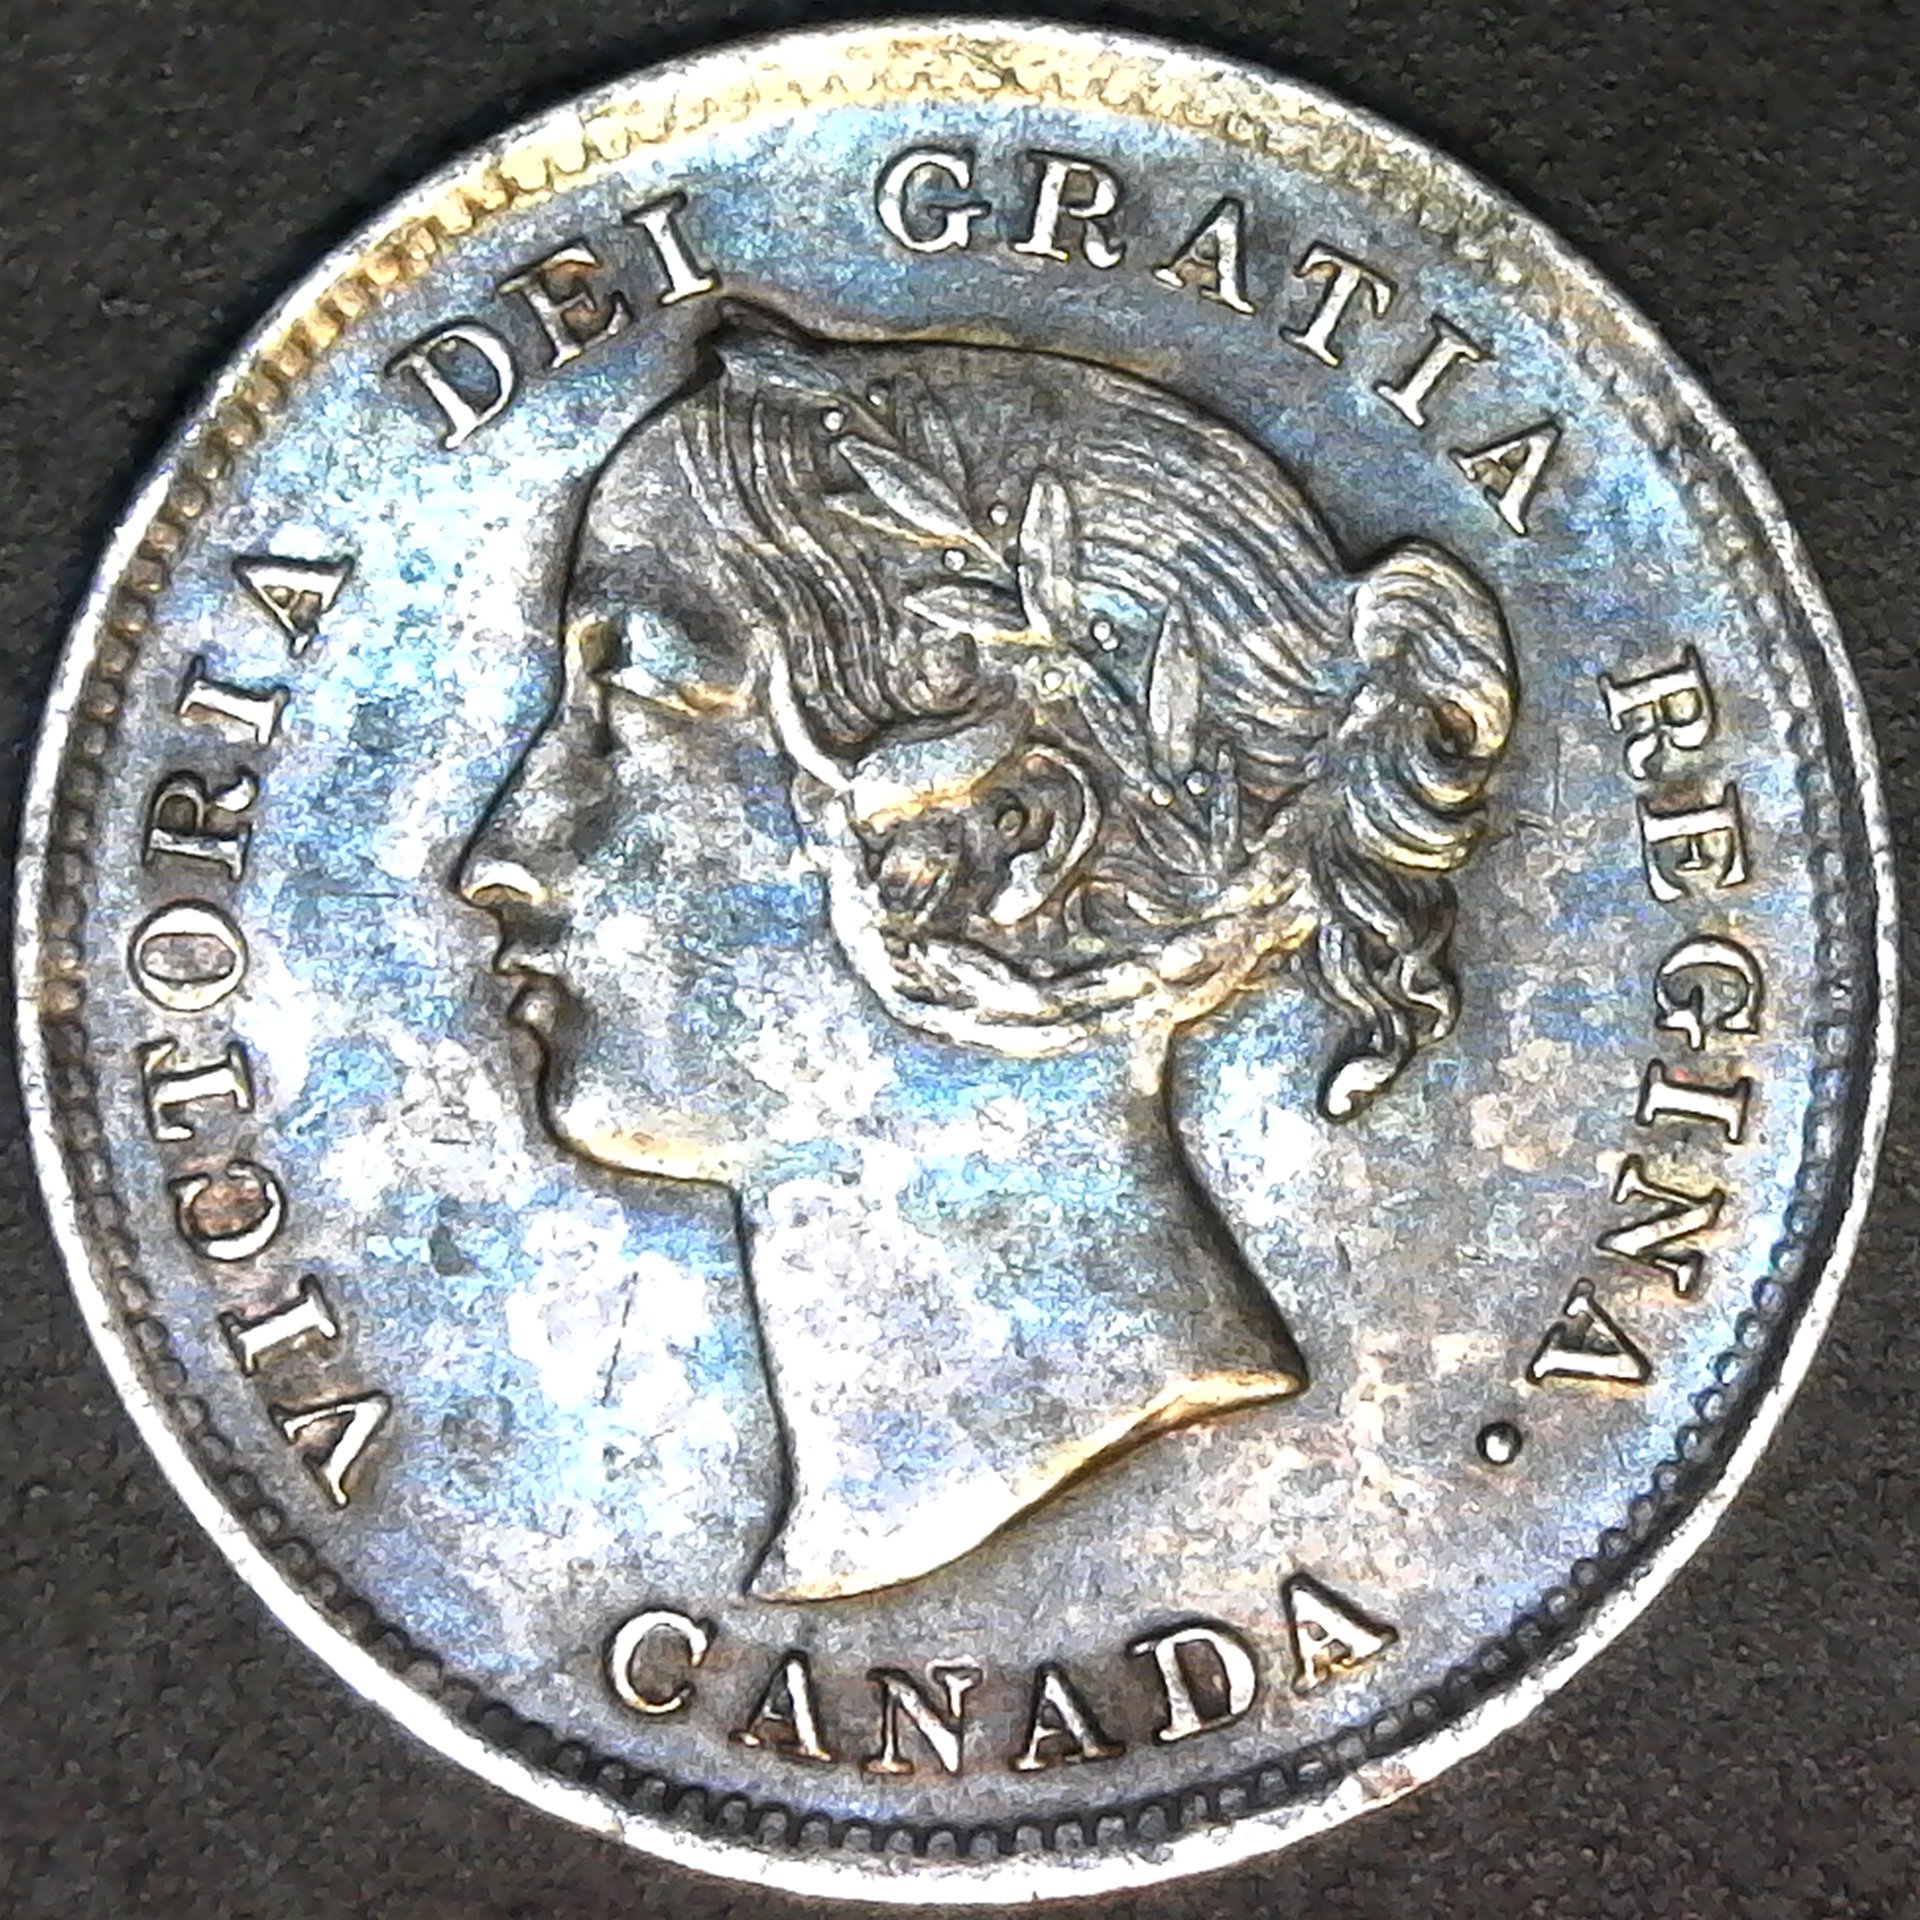 Canada 5 cents 1899 obv.jpg